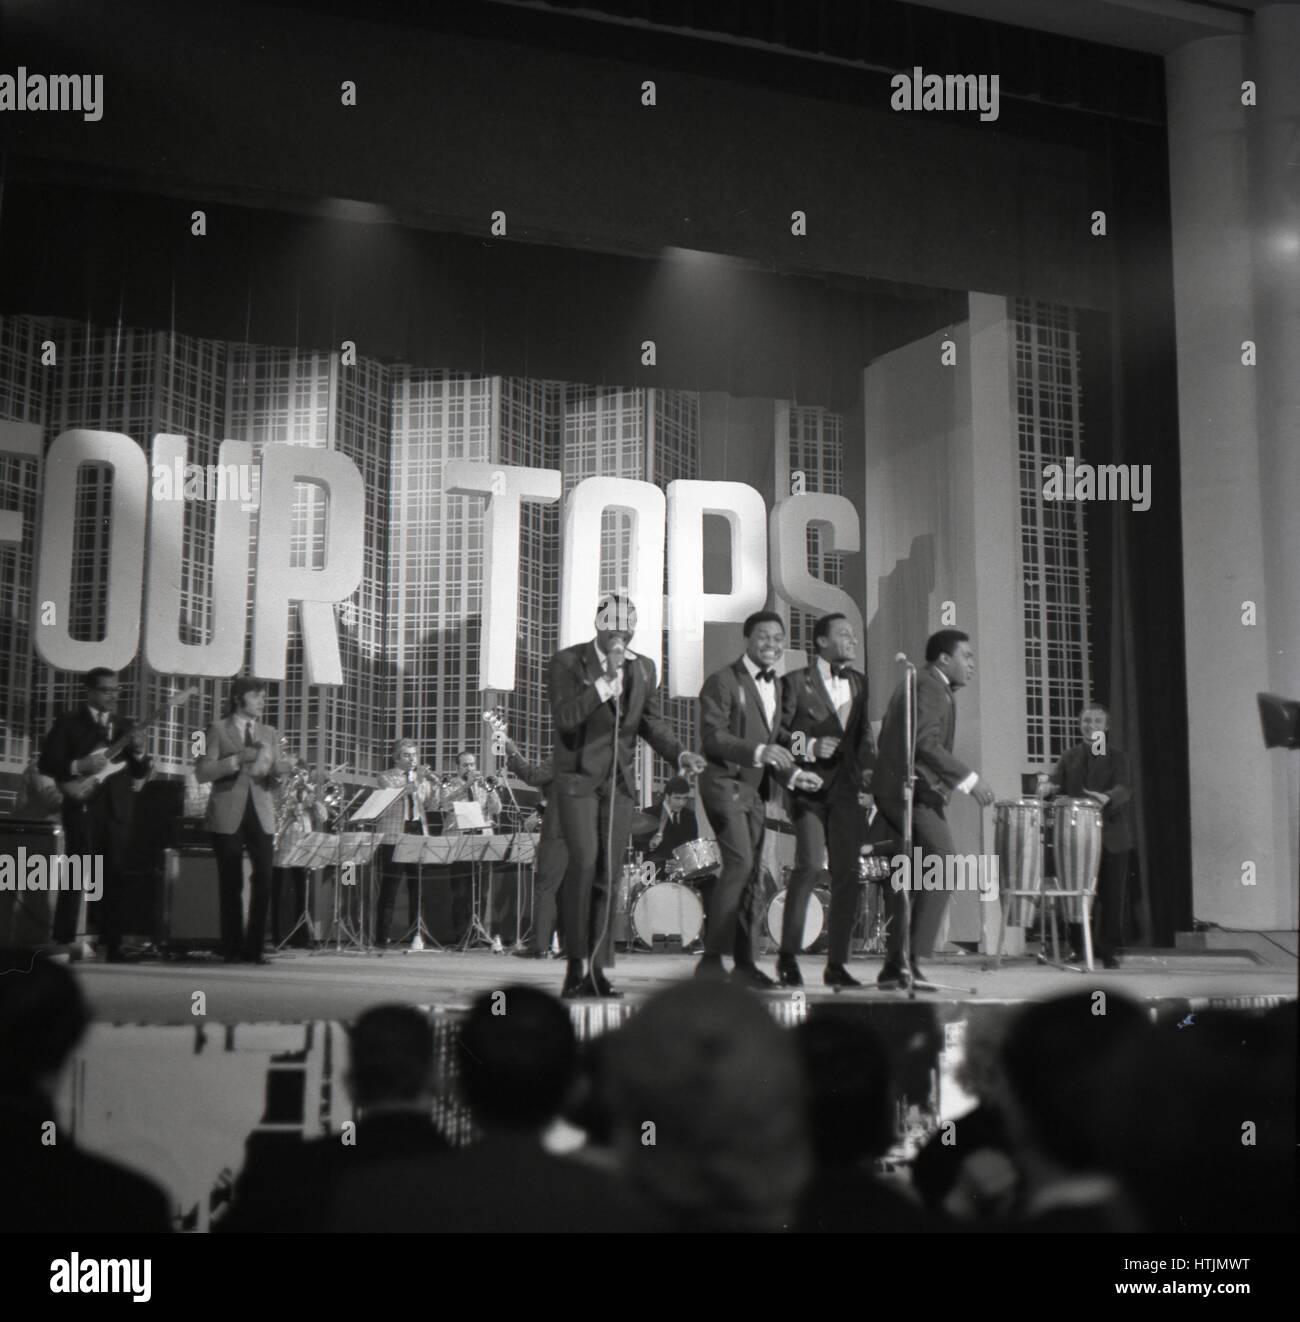 The four tops music hi-res stock photography and images - Alamy